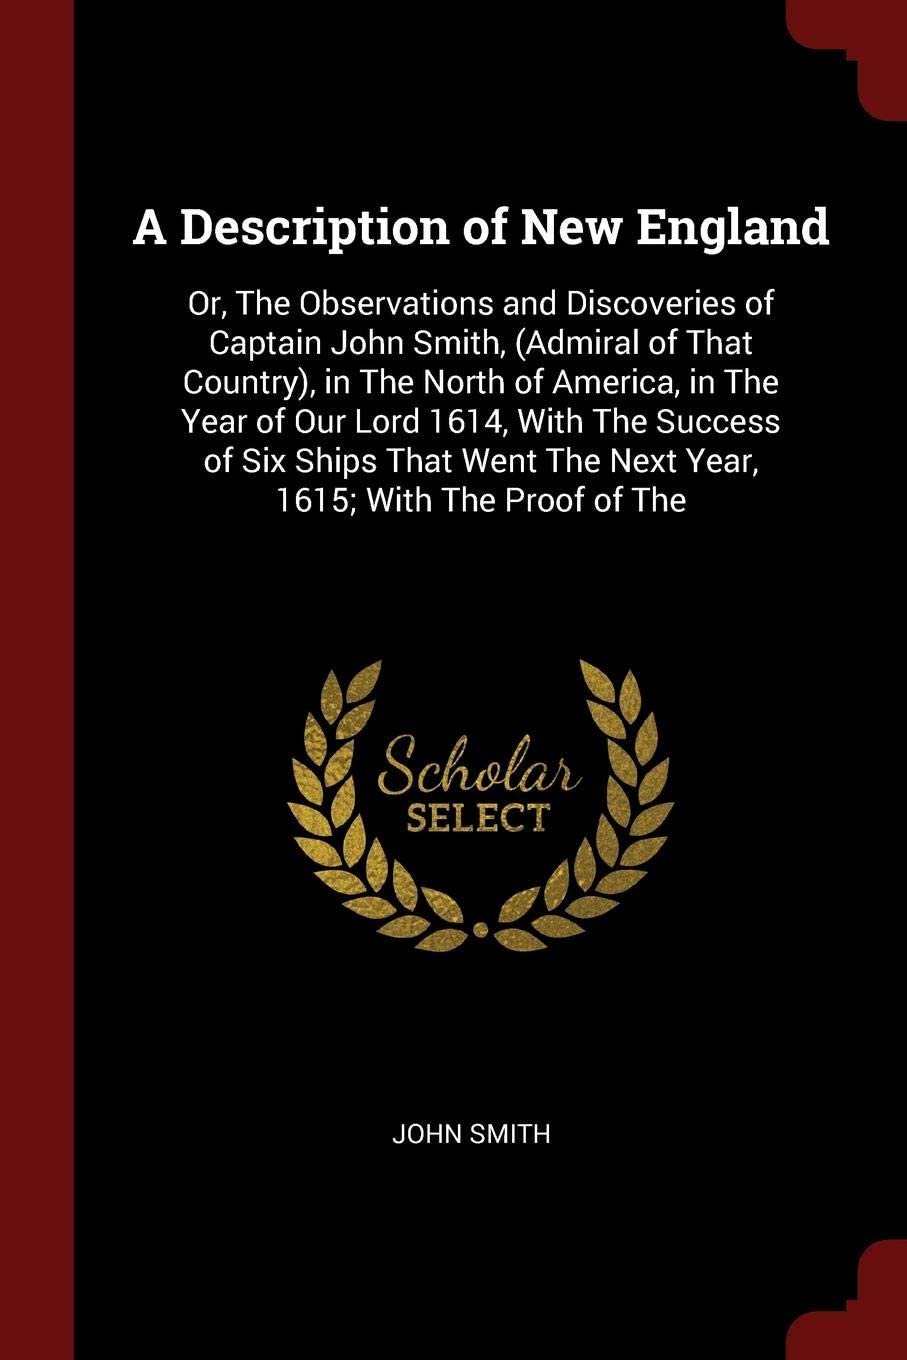 A Description of New England: Or, The Observations and Discoveries of Captain John Smith, (Admiral of That Country), in The North of America, in The ... The Next Year, 1615; With The Proof of The